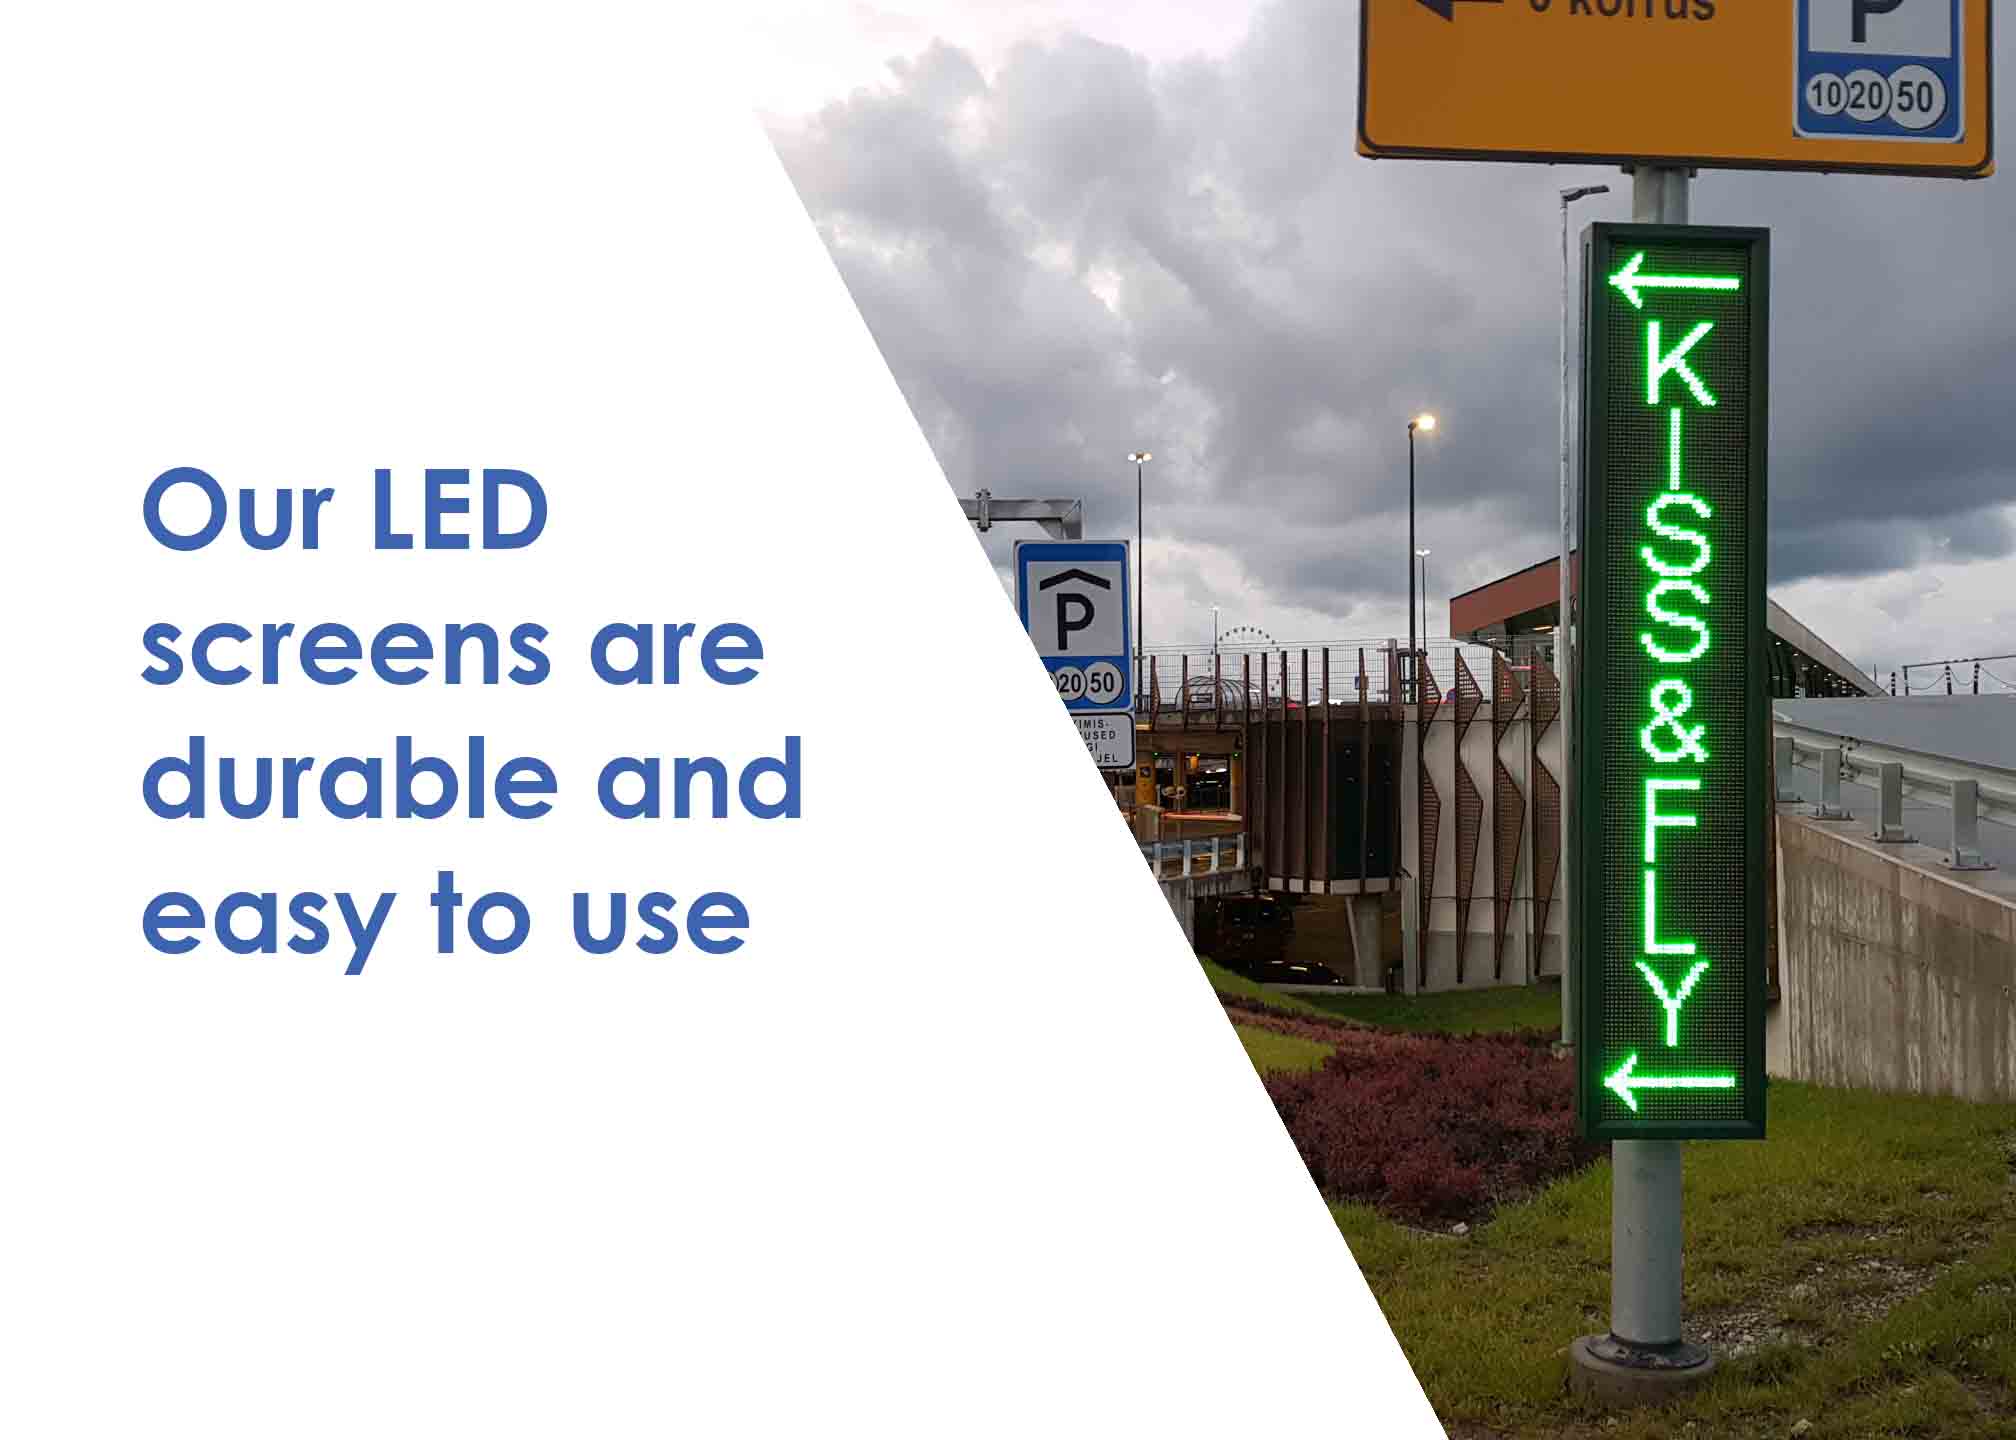 Out LED screens are durable and easy to work with